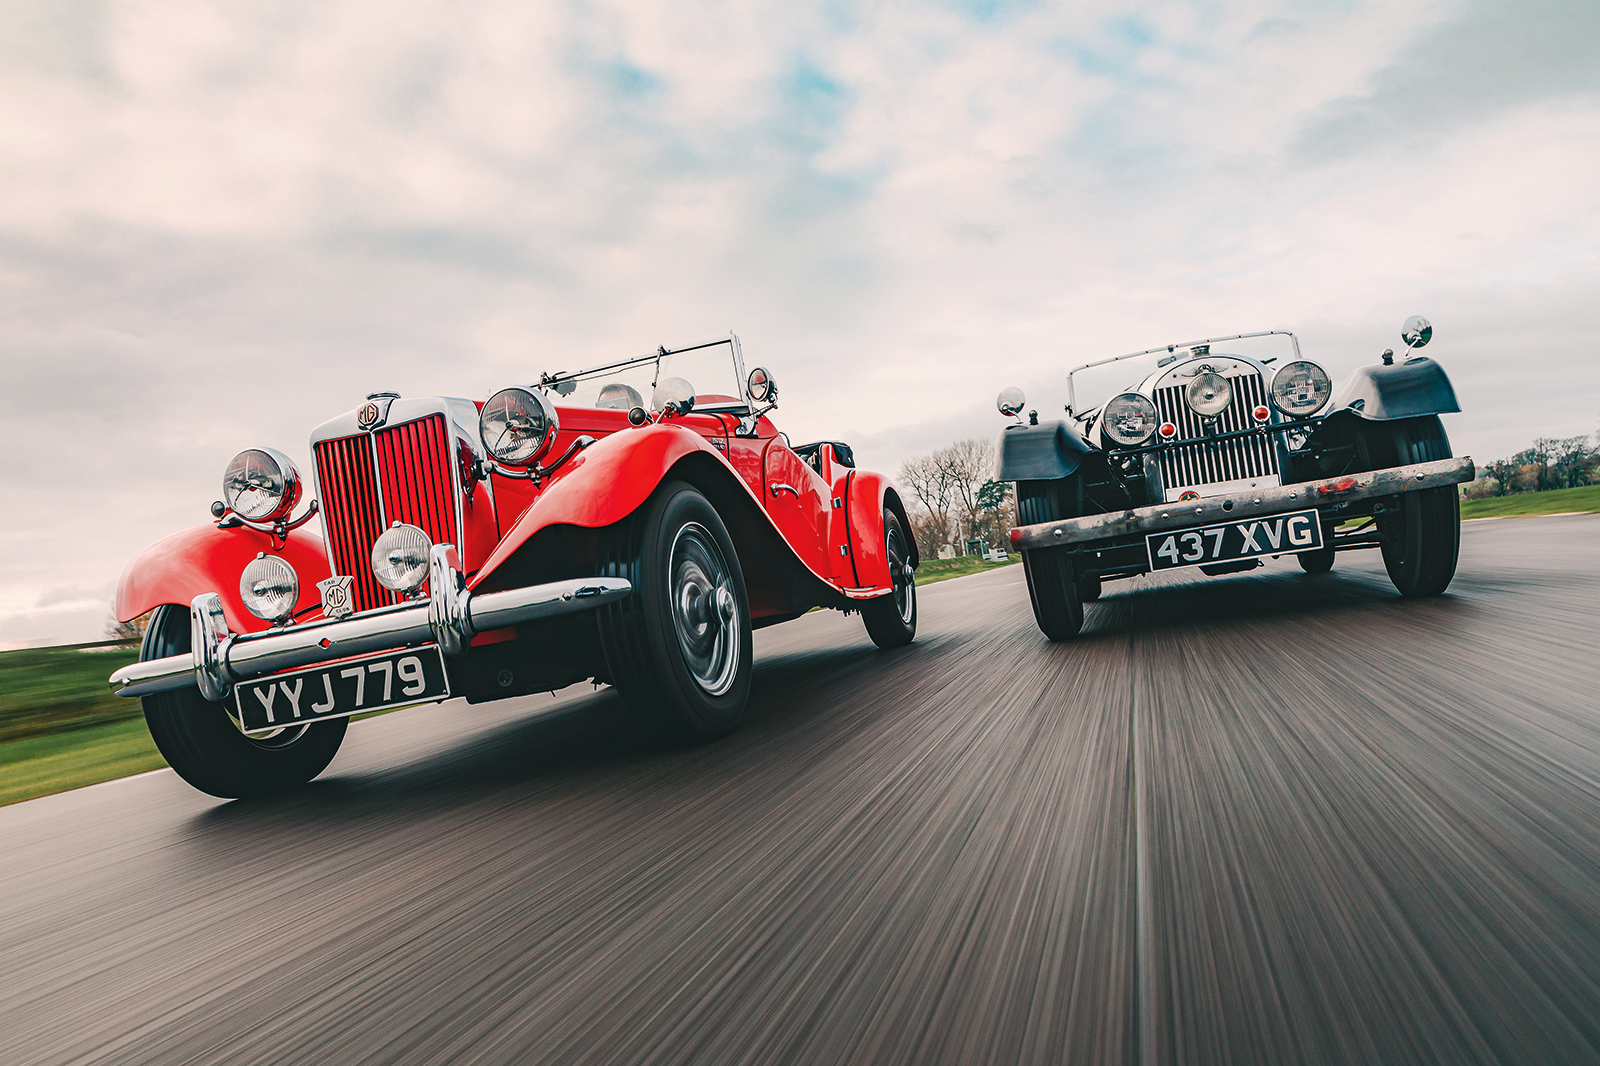 Have your say on how classic cars are registered in the UK